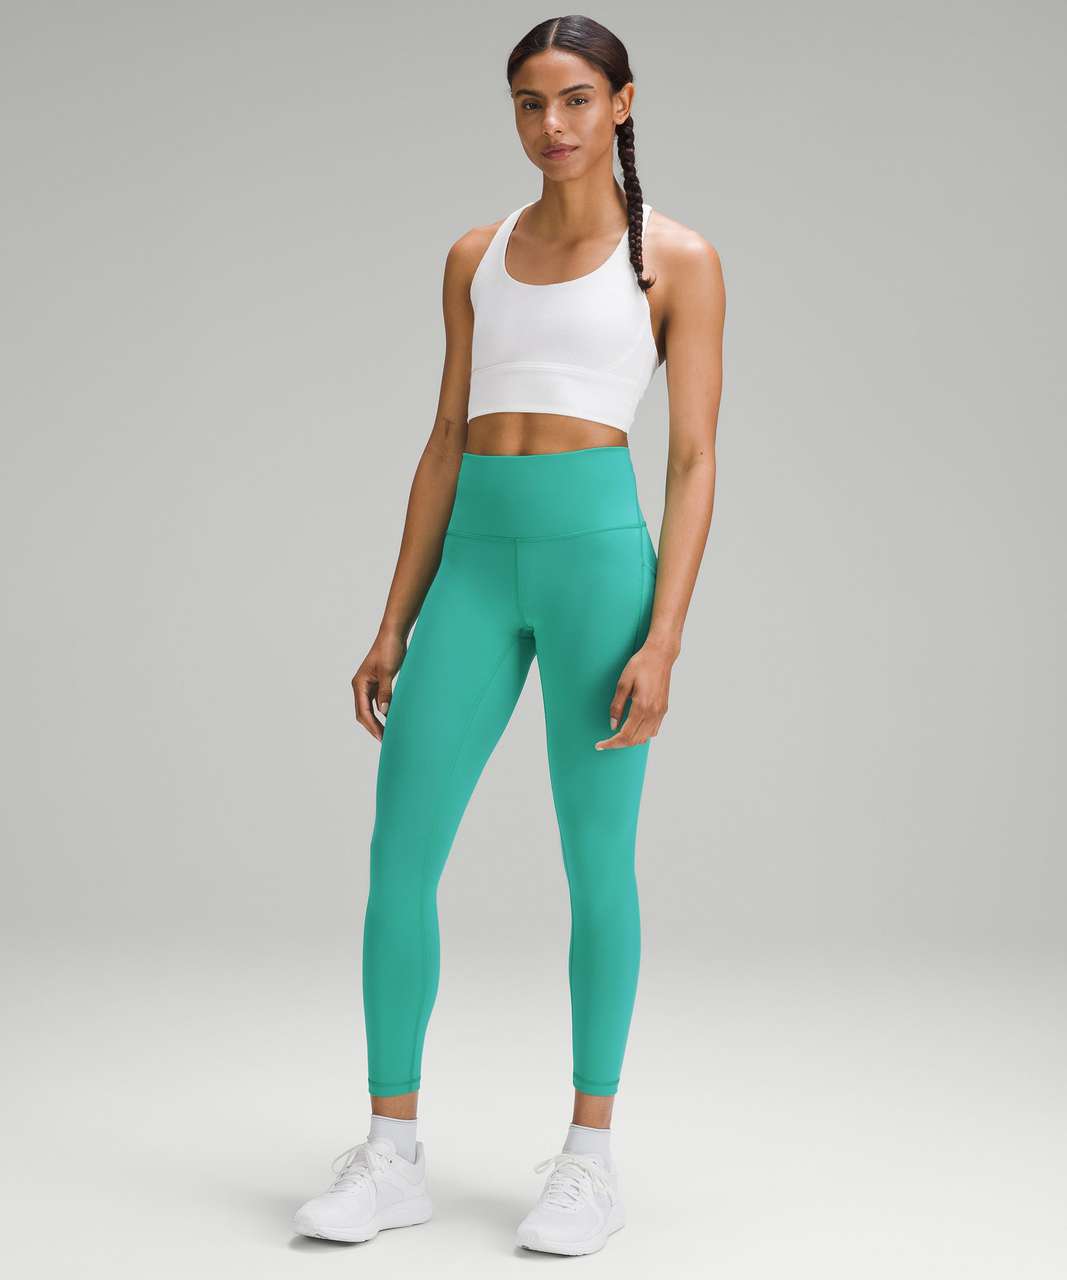 Lululemon Wunder Train High-Rise Tight with Pockets 25" - Kelly Green